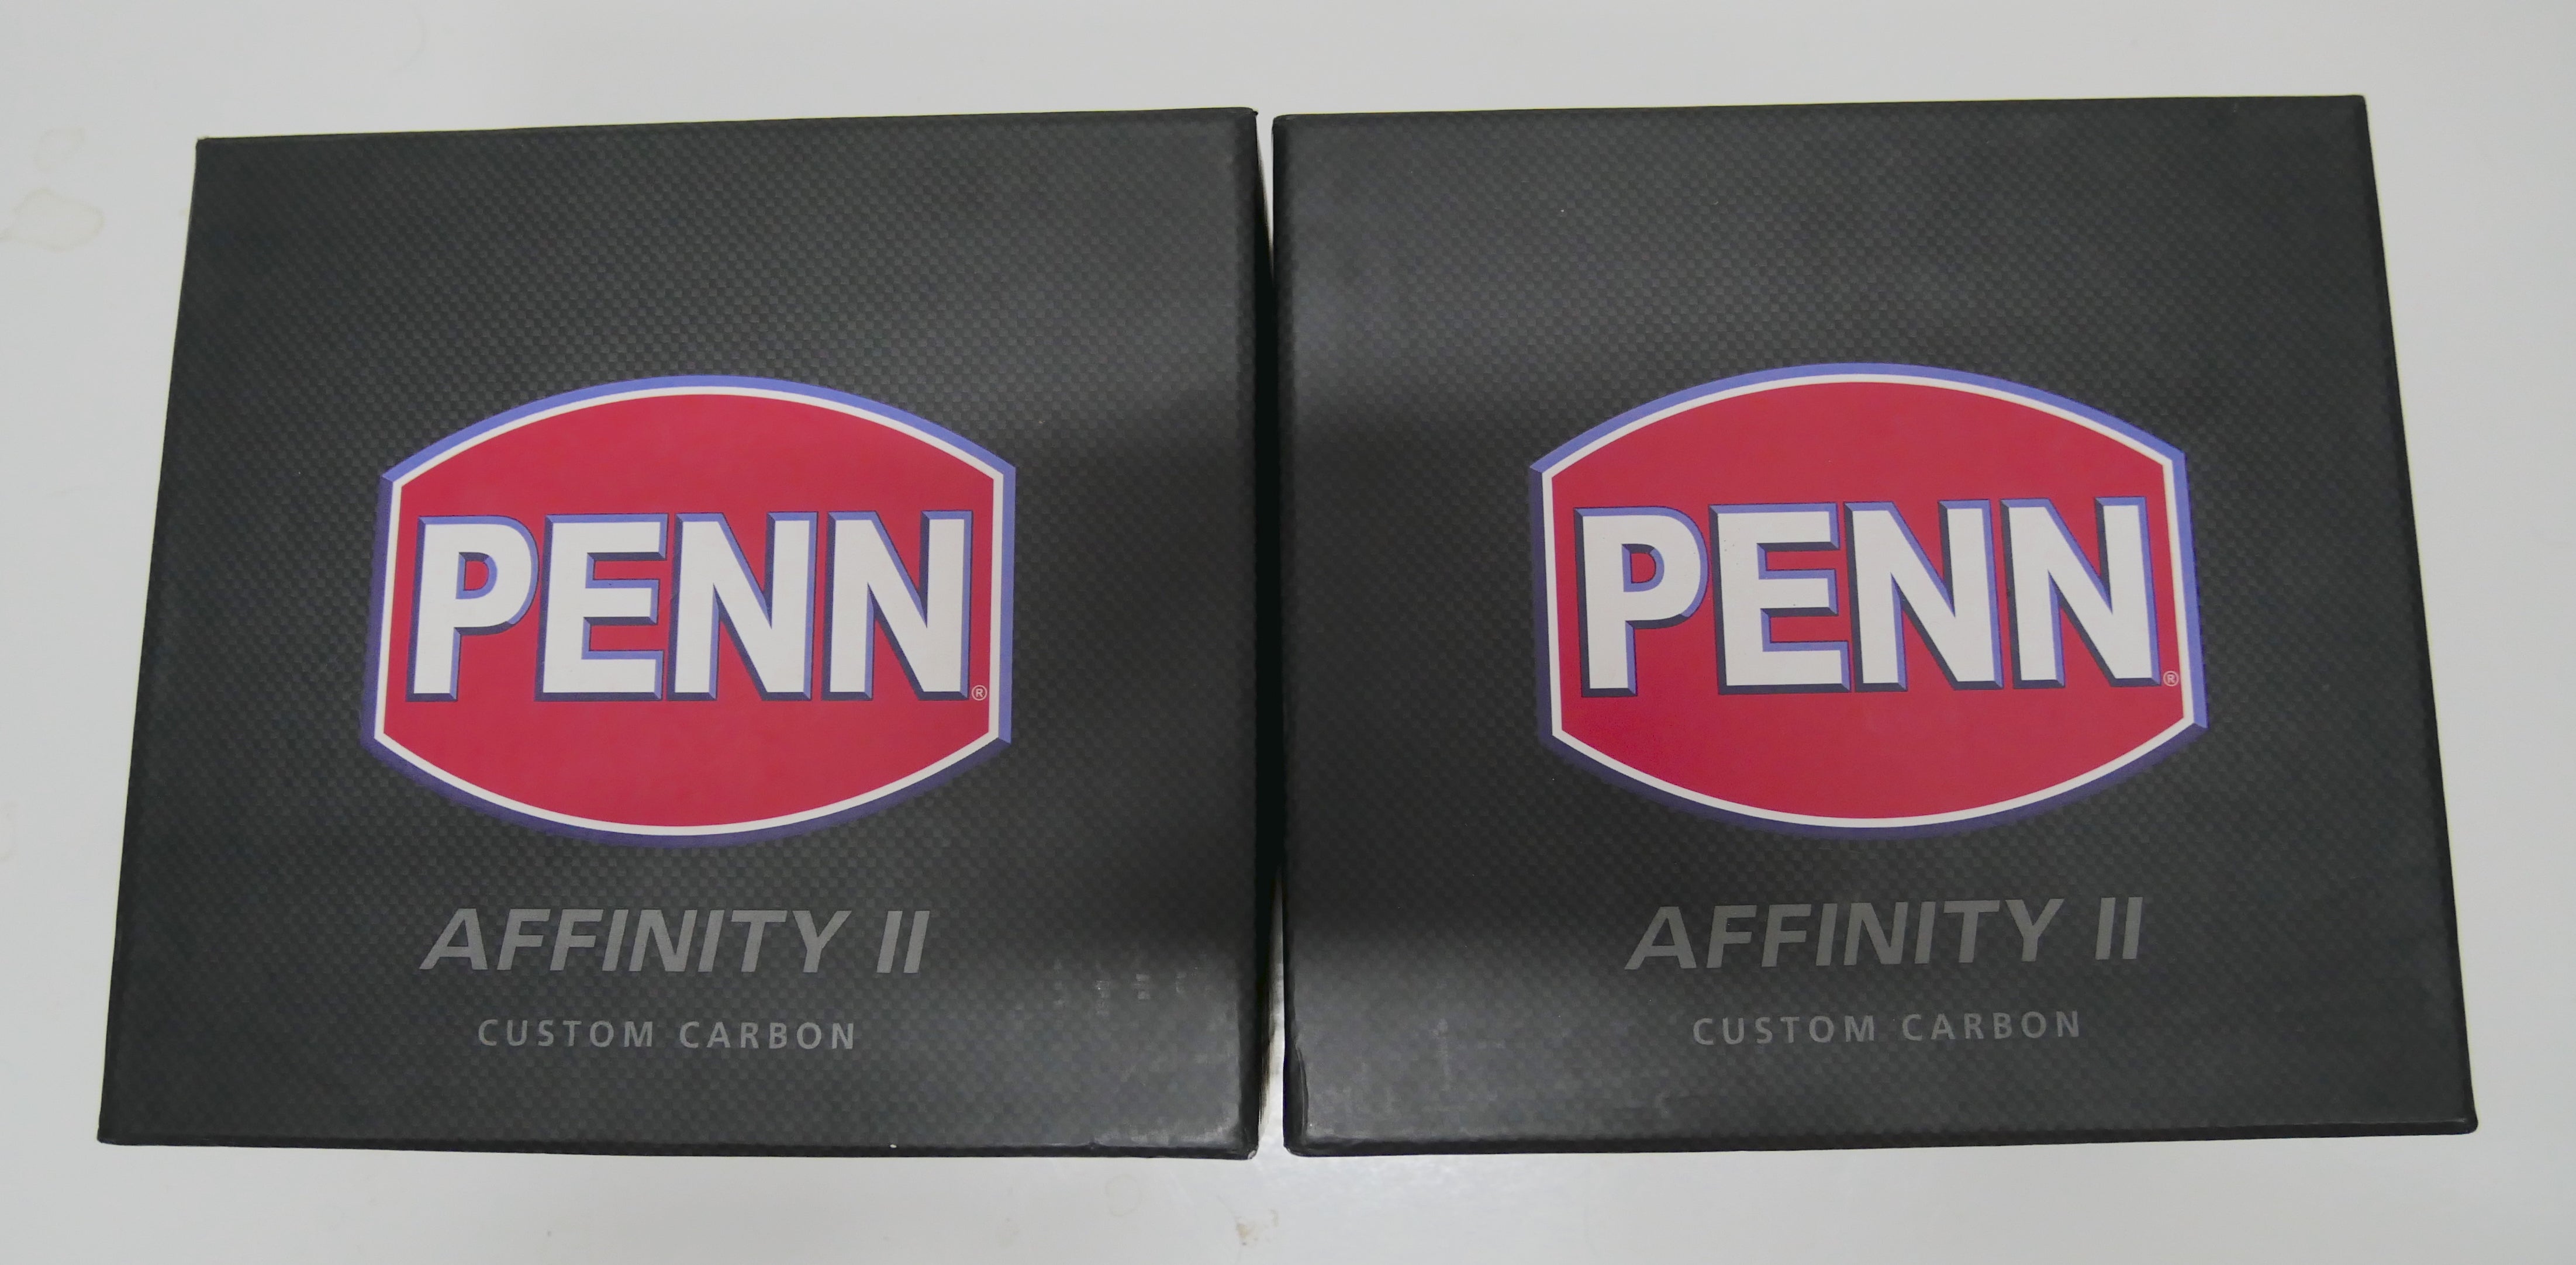 Penn Affinity II 7000 Custom Carbon Reels X2 – Fish For Tackle